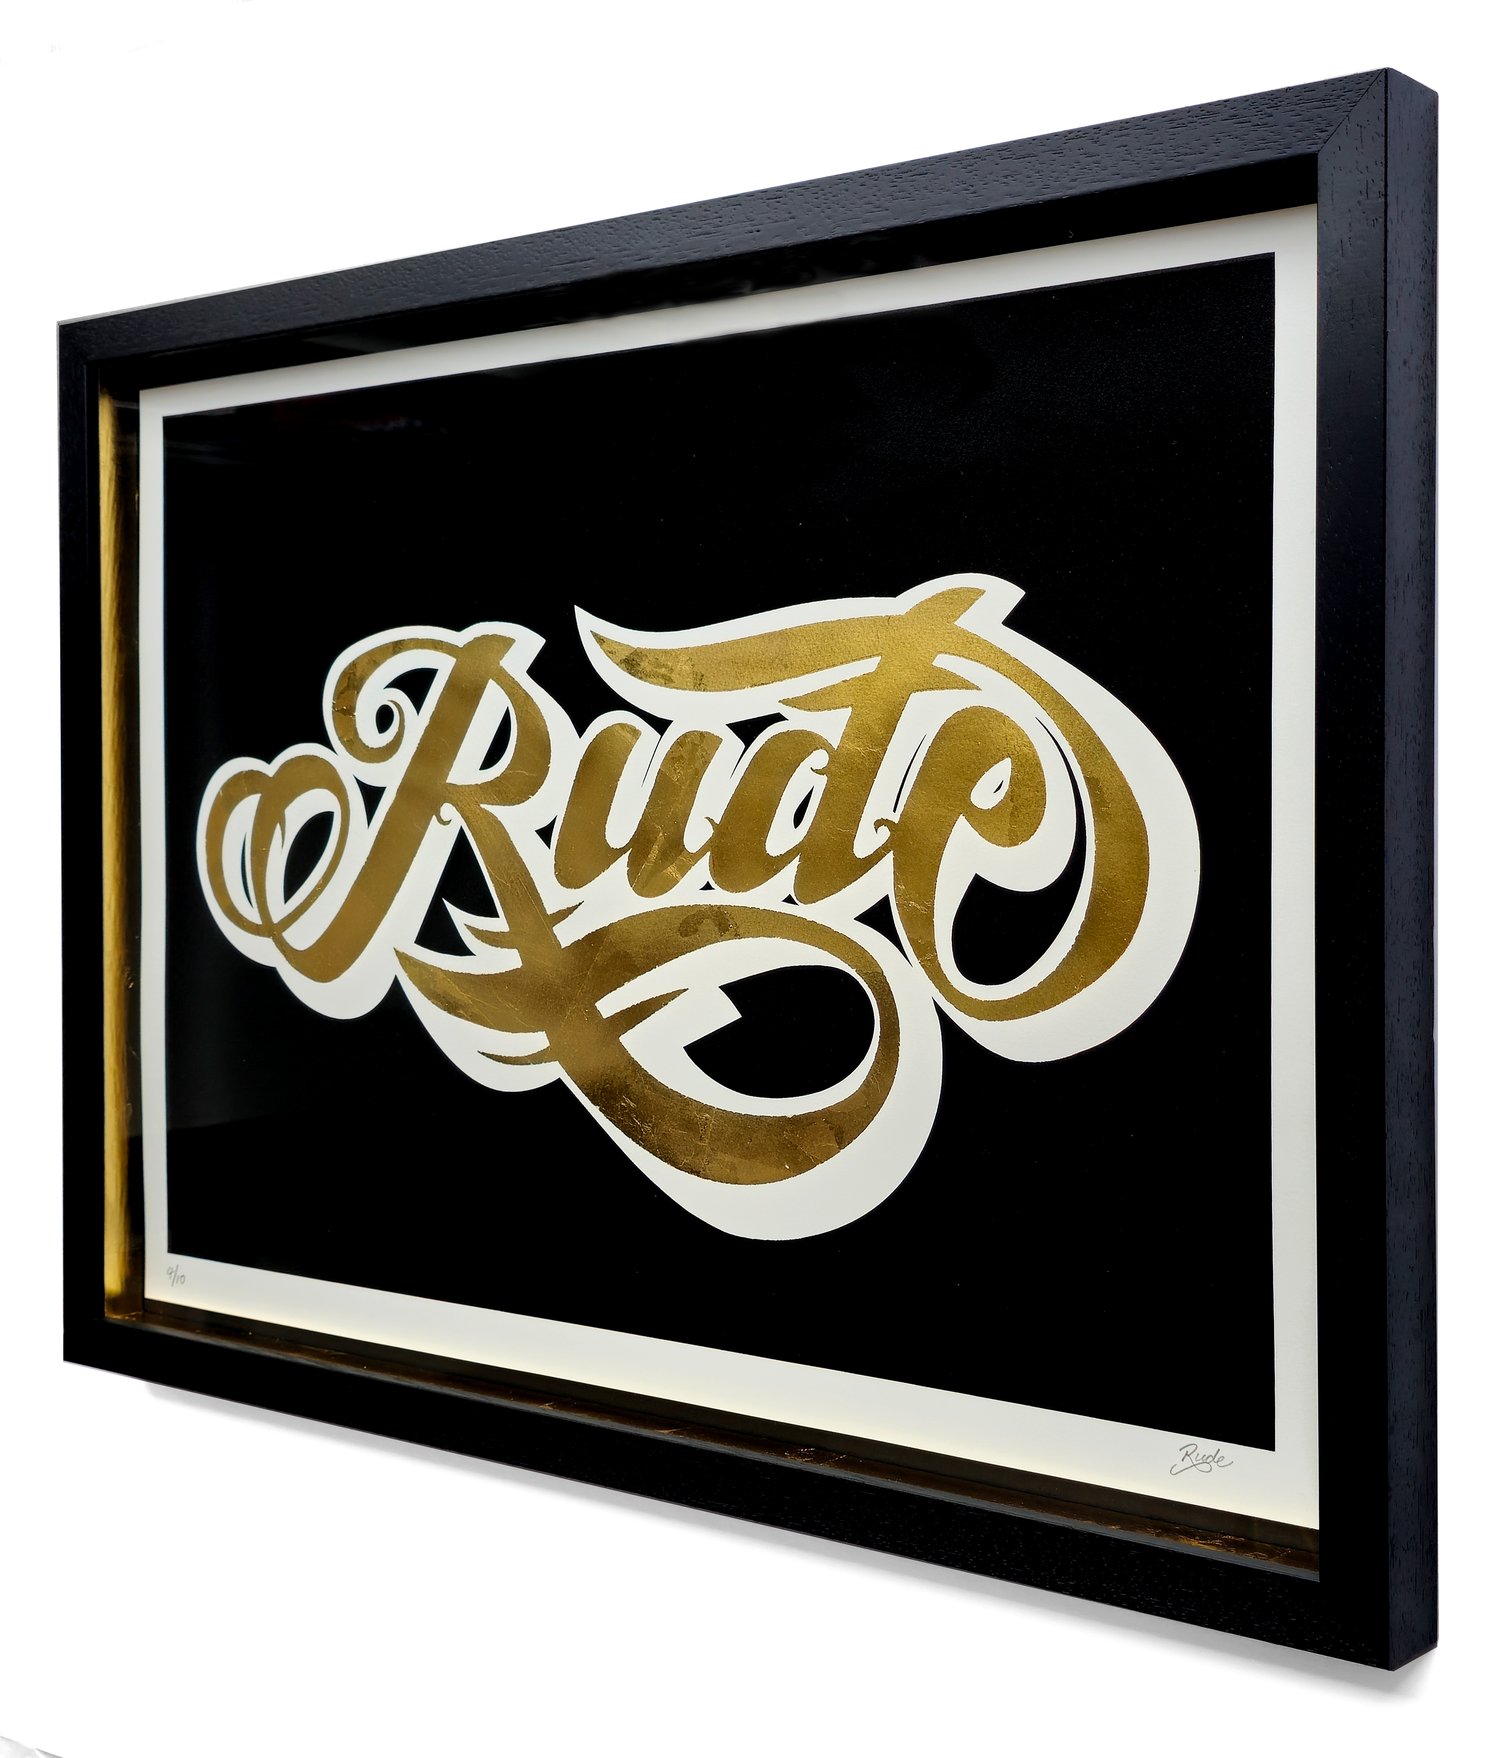 Image of 'RUDE'  (Gold leaf) by Isie